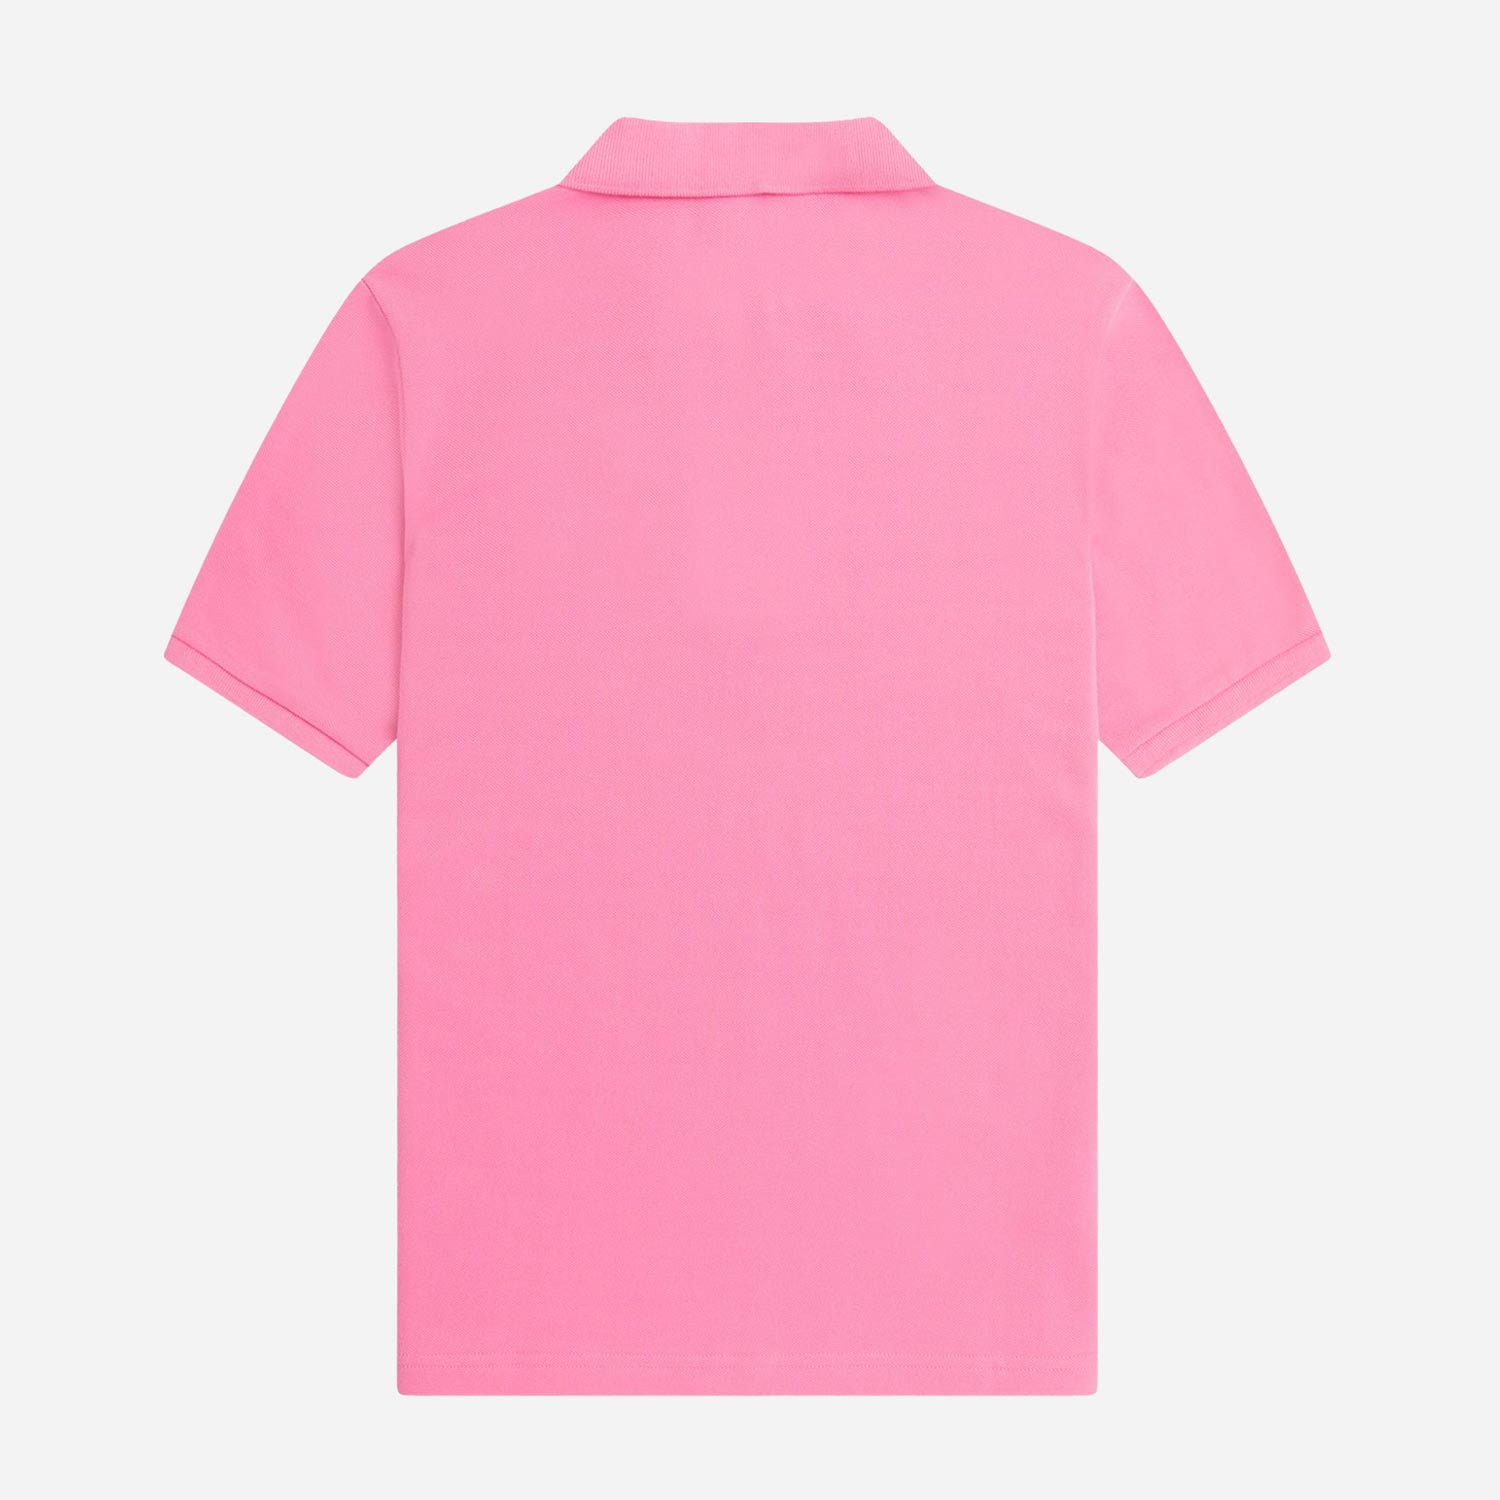 Fred Perry Women's Regular Fit Short Sleeve Polo - Bright Pink